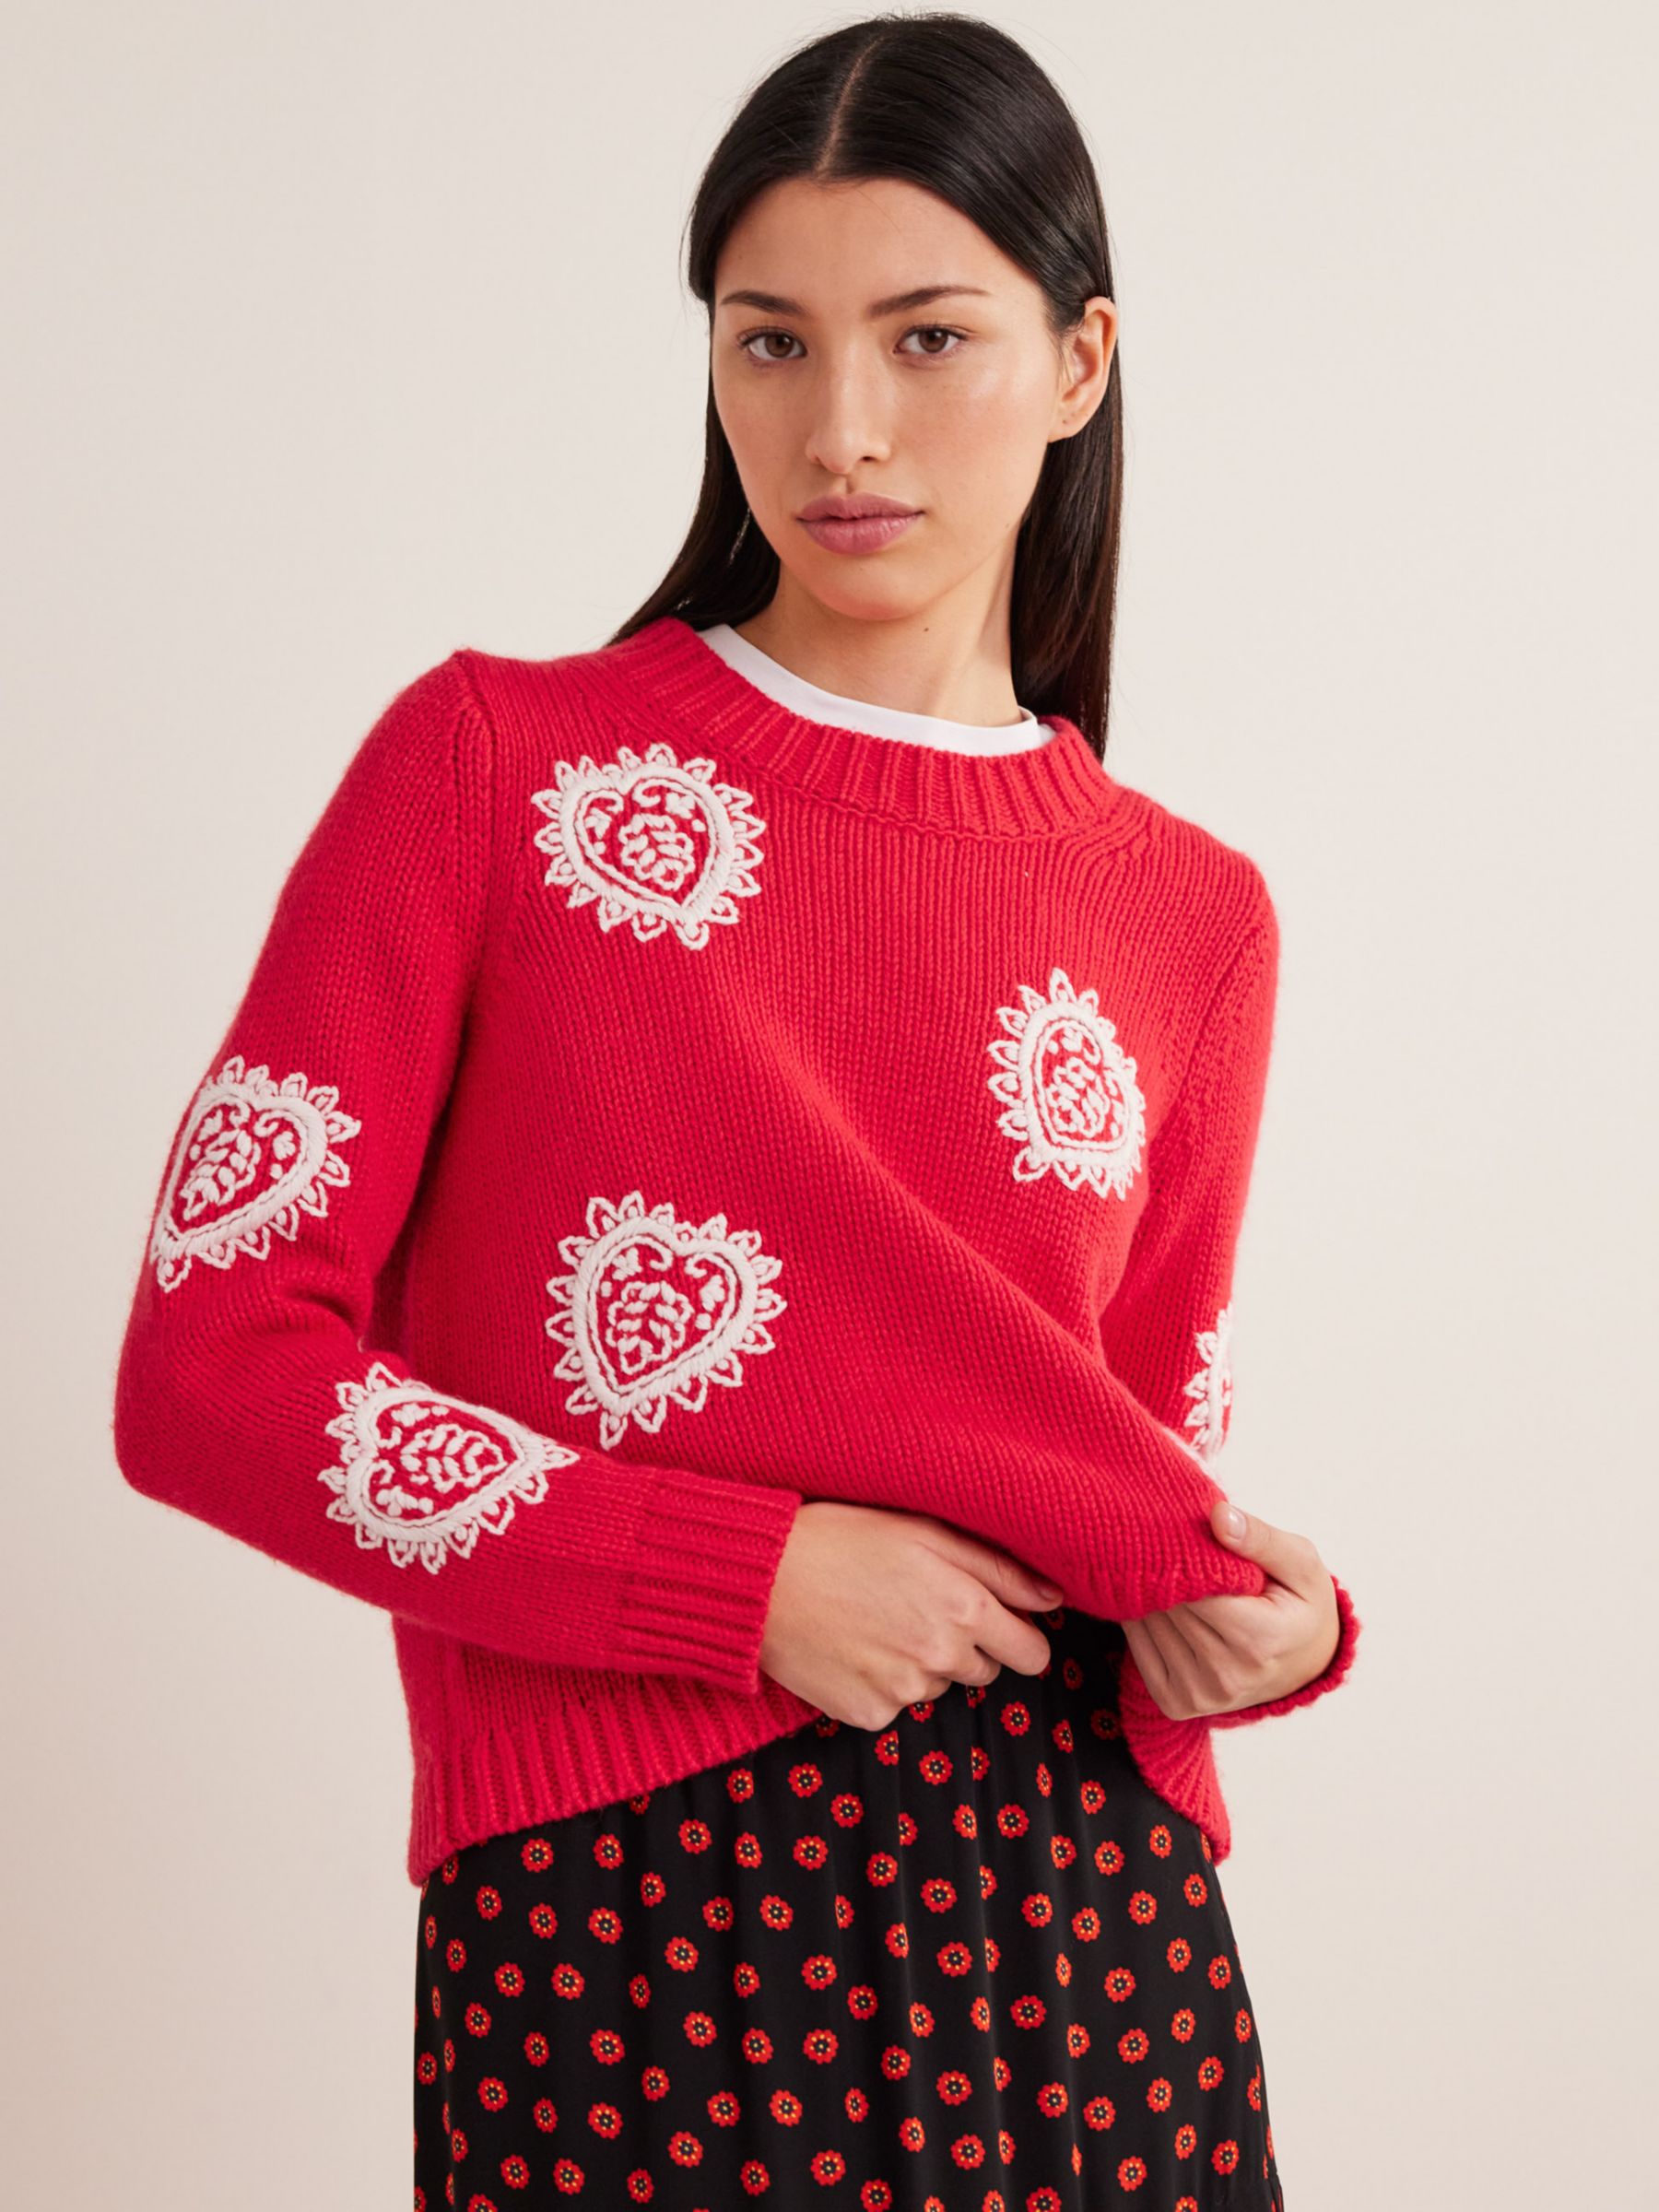 Boden Embroidered Hearts Chunky Knit Jumper, Strawberry Tart Red